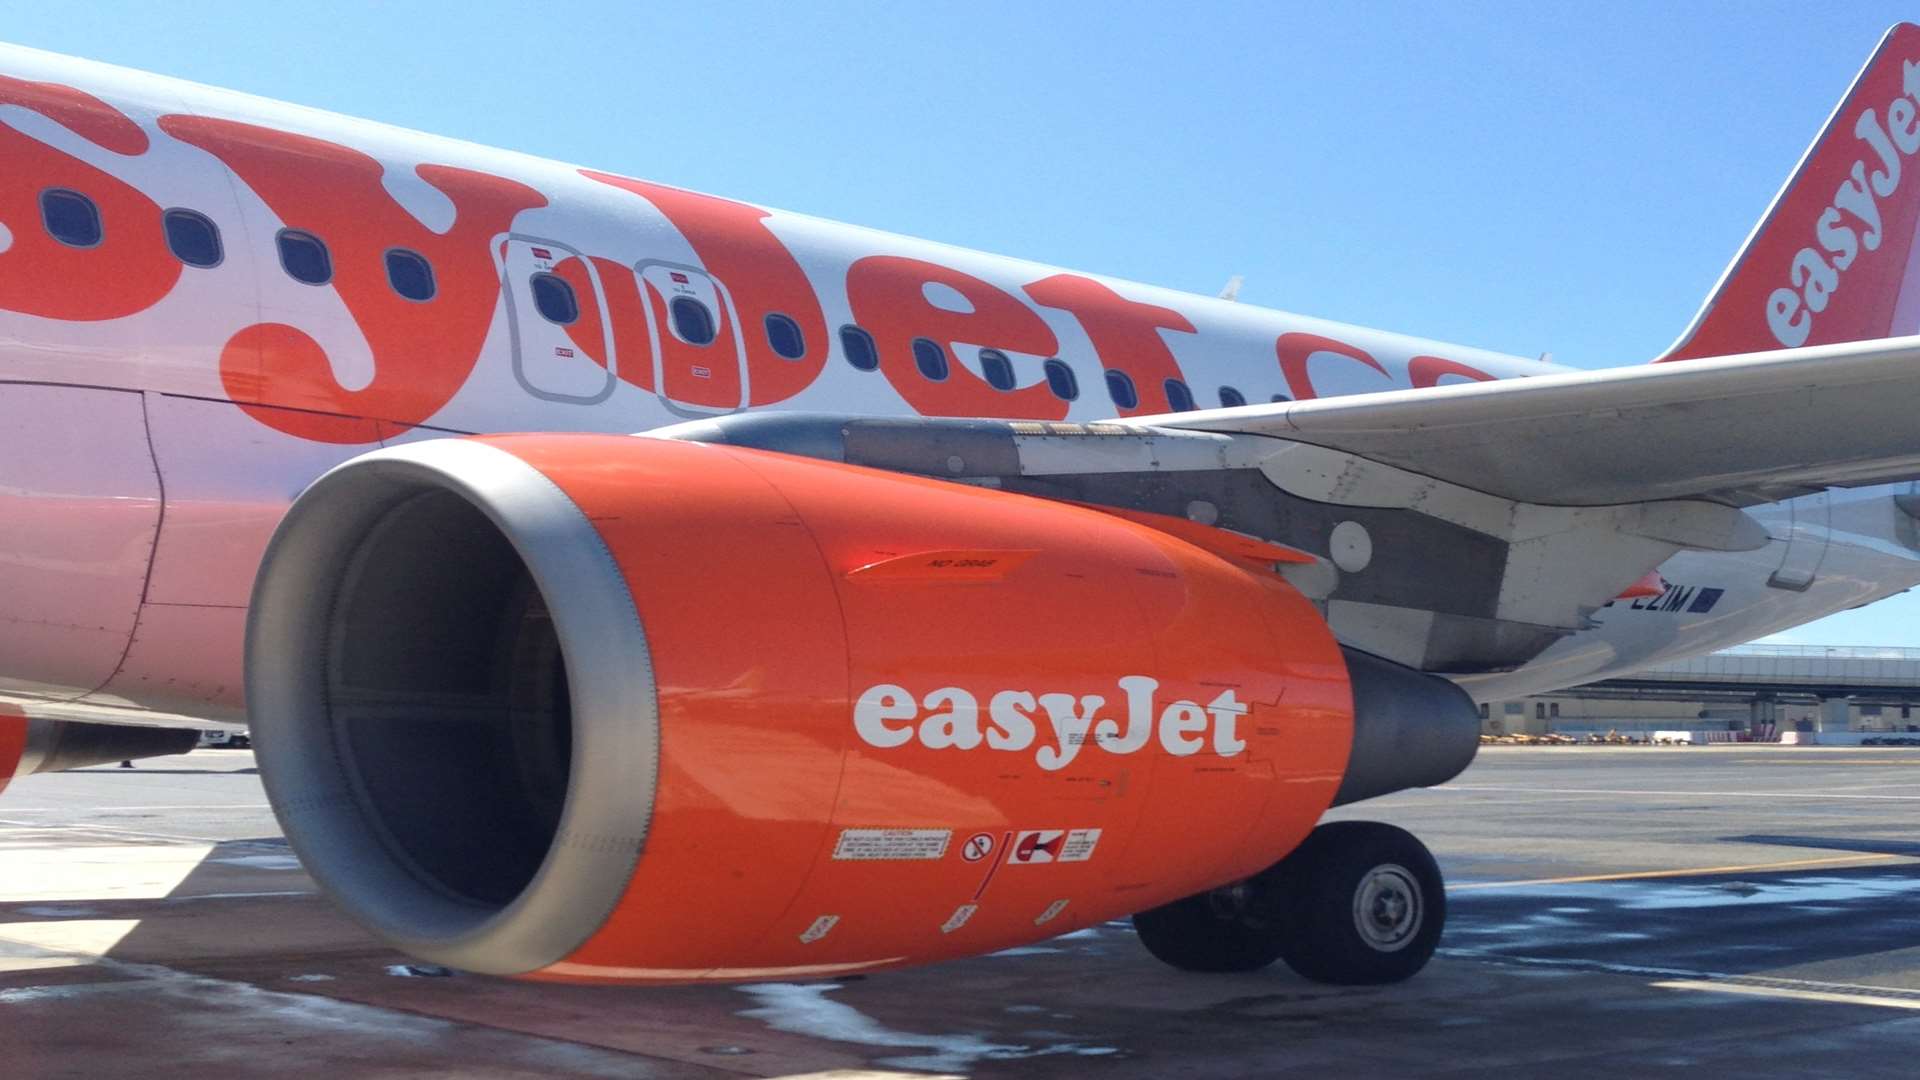 easyJet has pledged to reduce aircraft noise